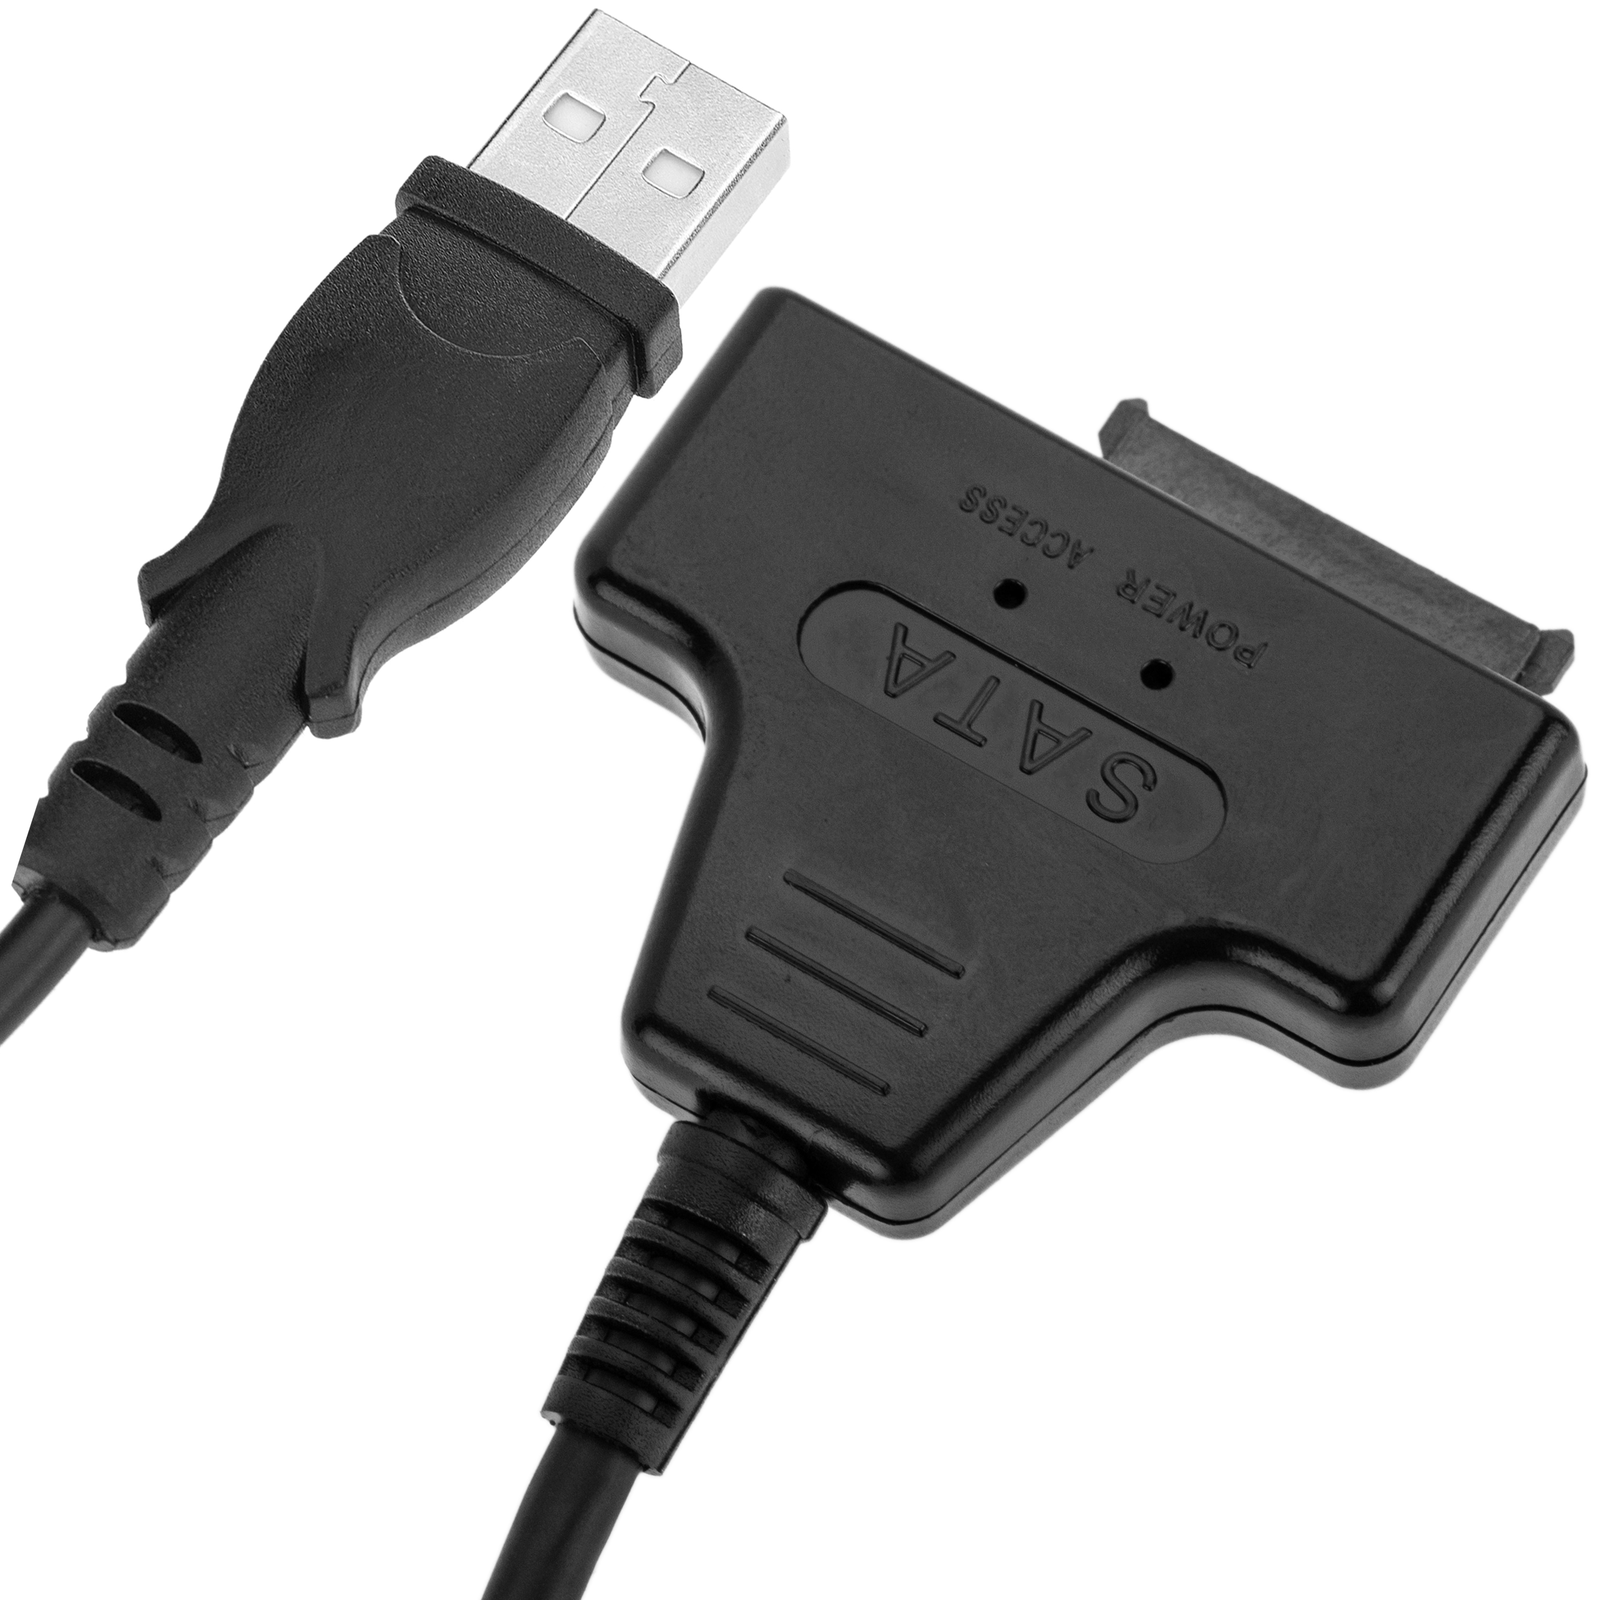 SATA Cable USB 2.0 data and power